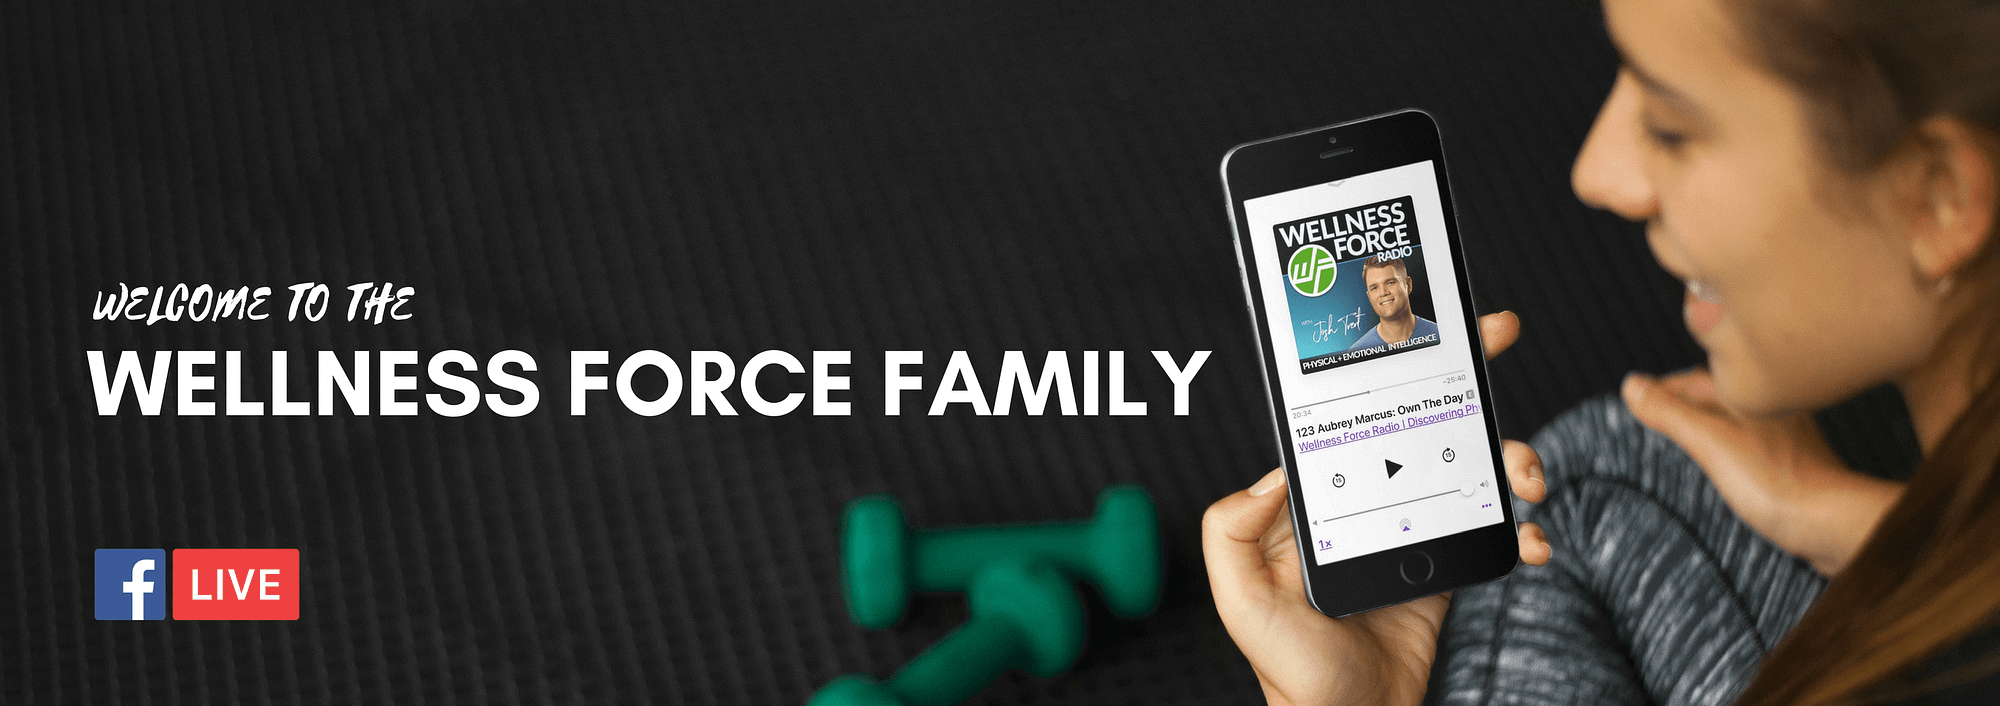 welcome to wellness force